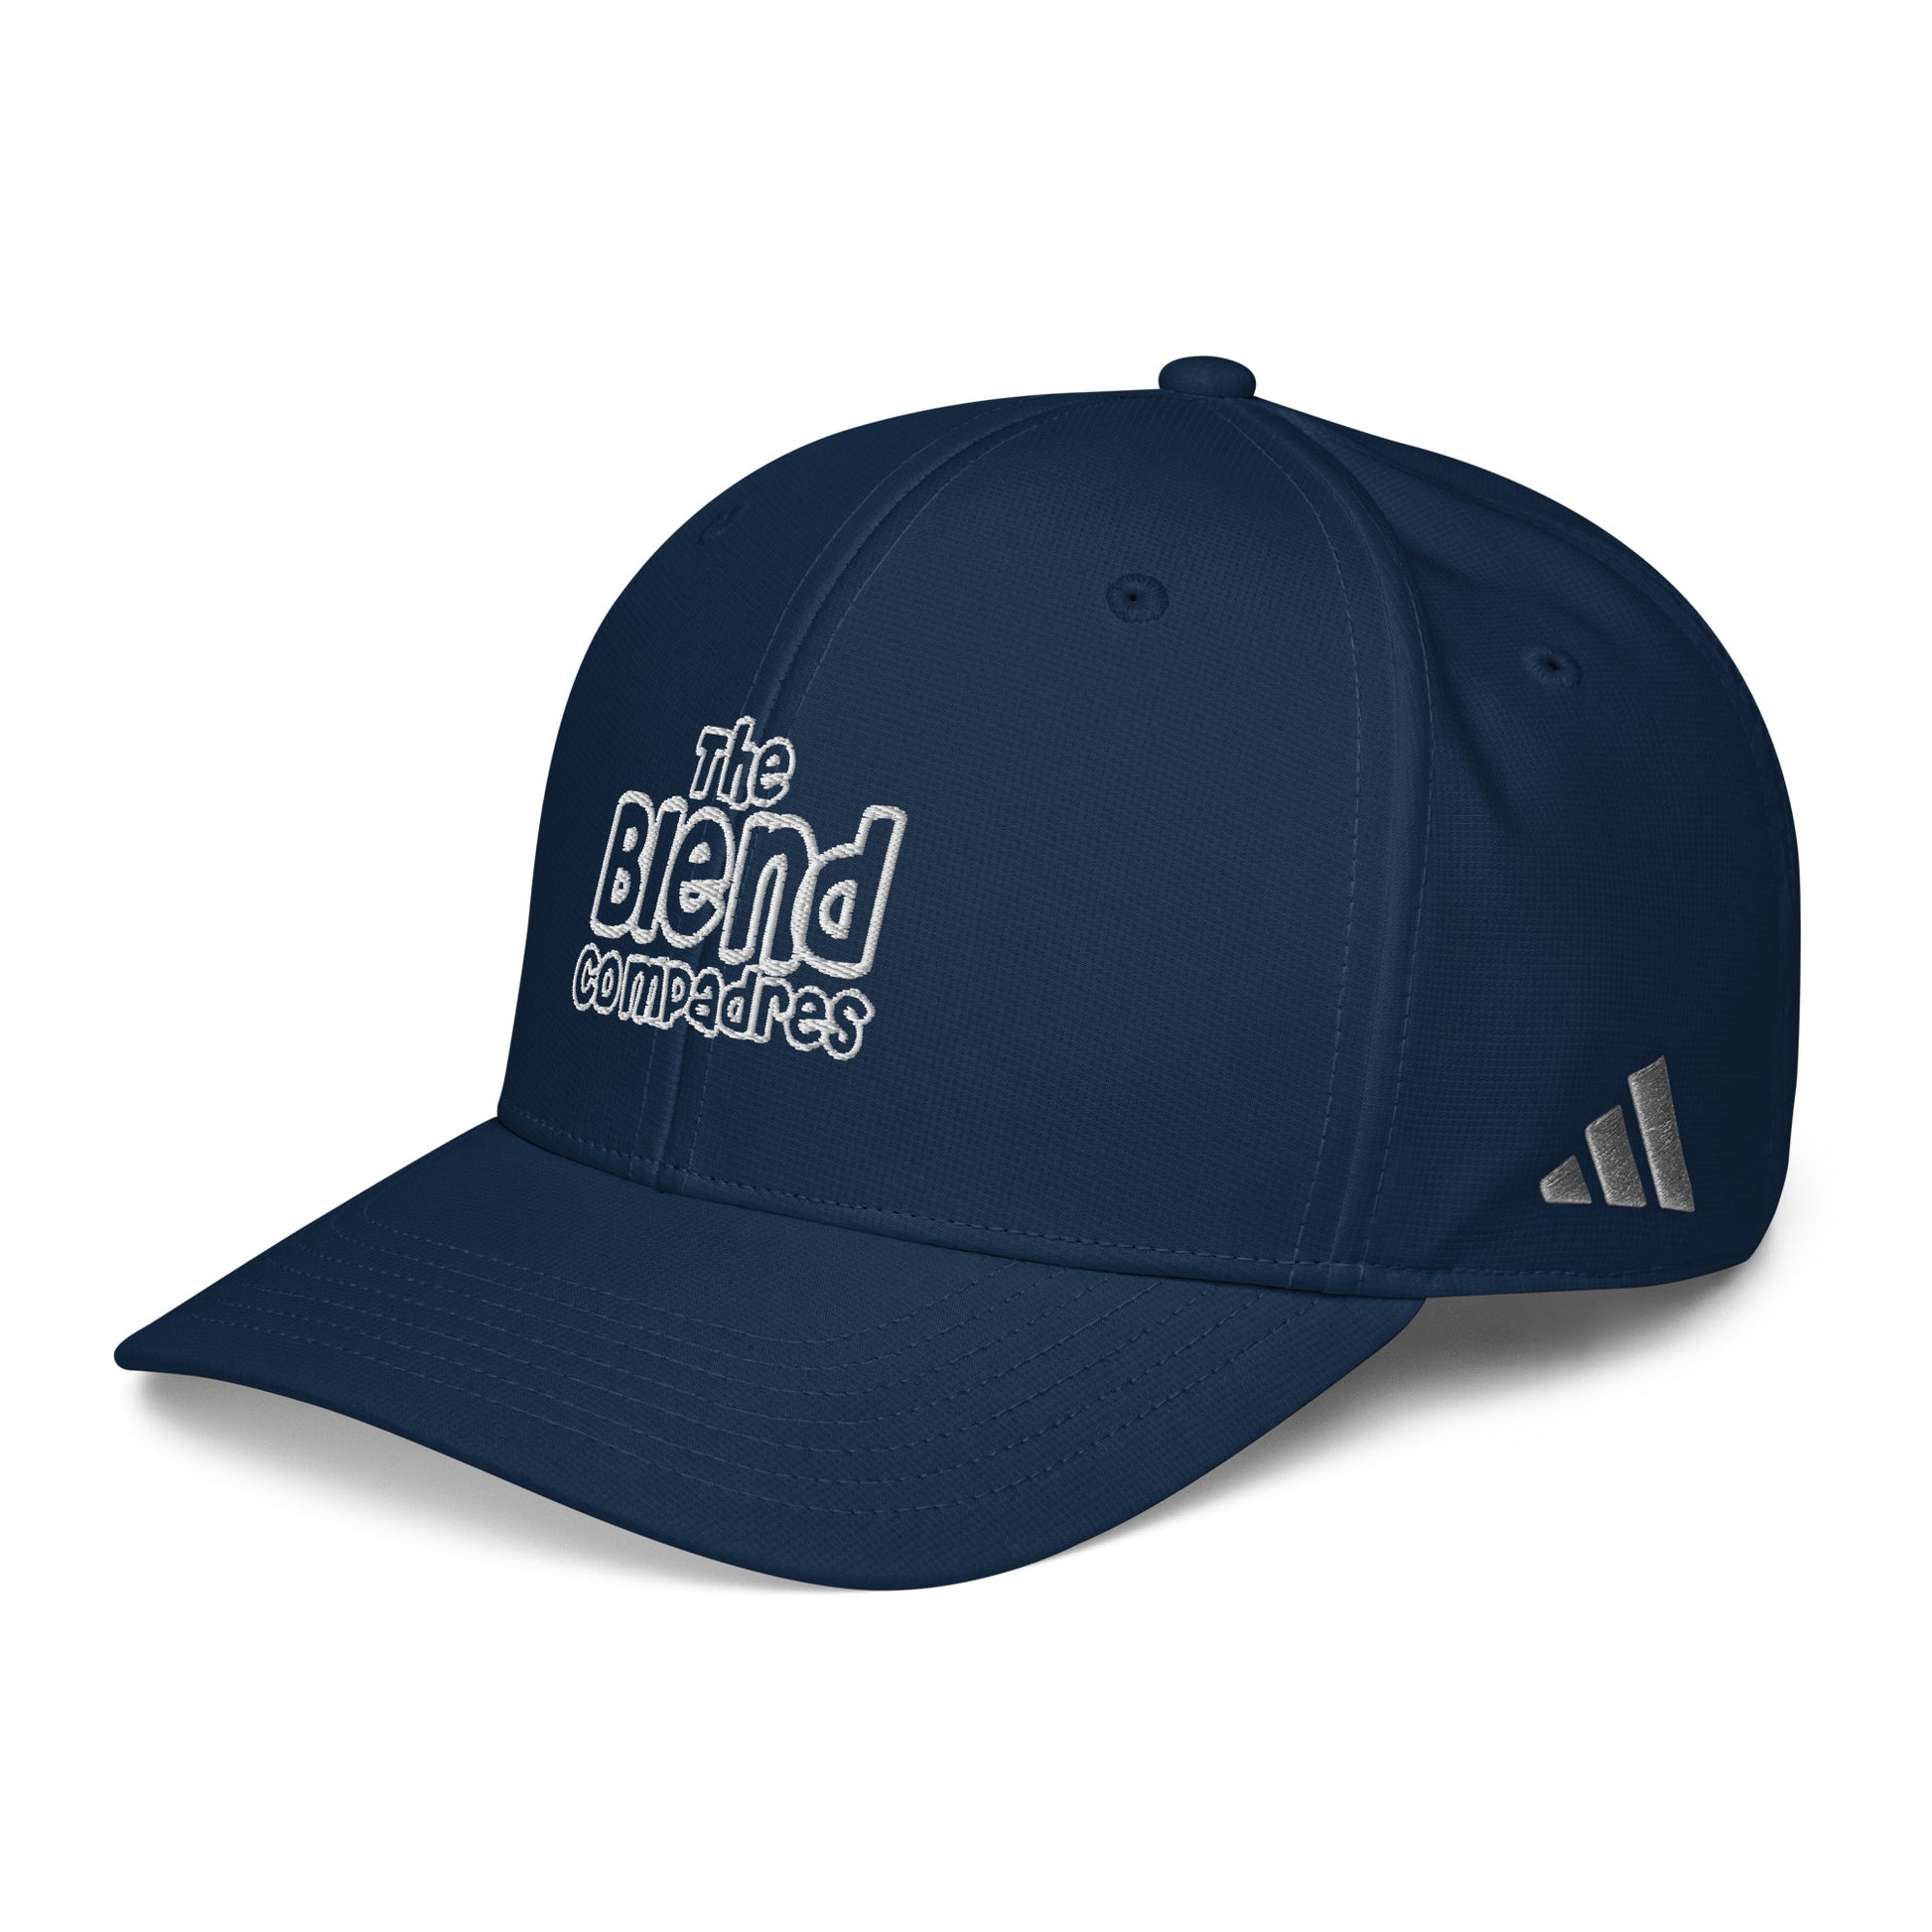 The Blend Compadres Adidas Performance Cap - Another Bodega